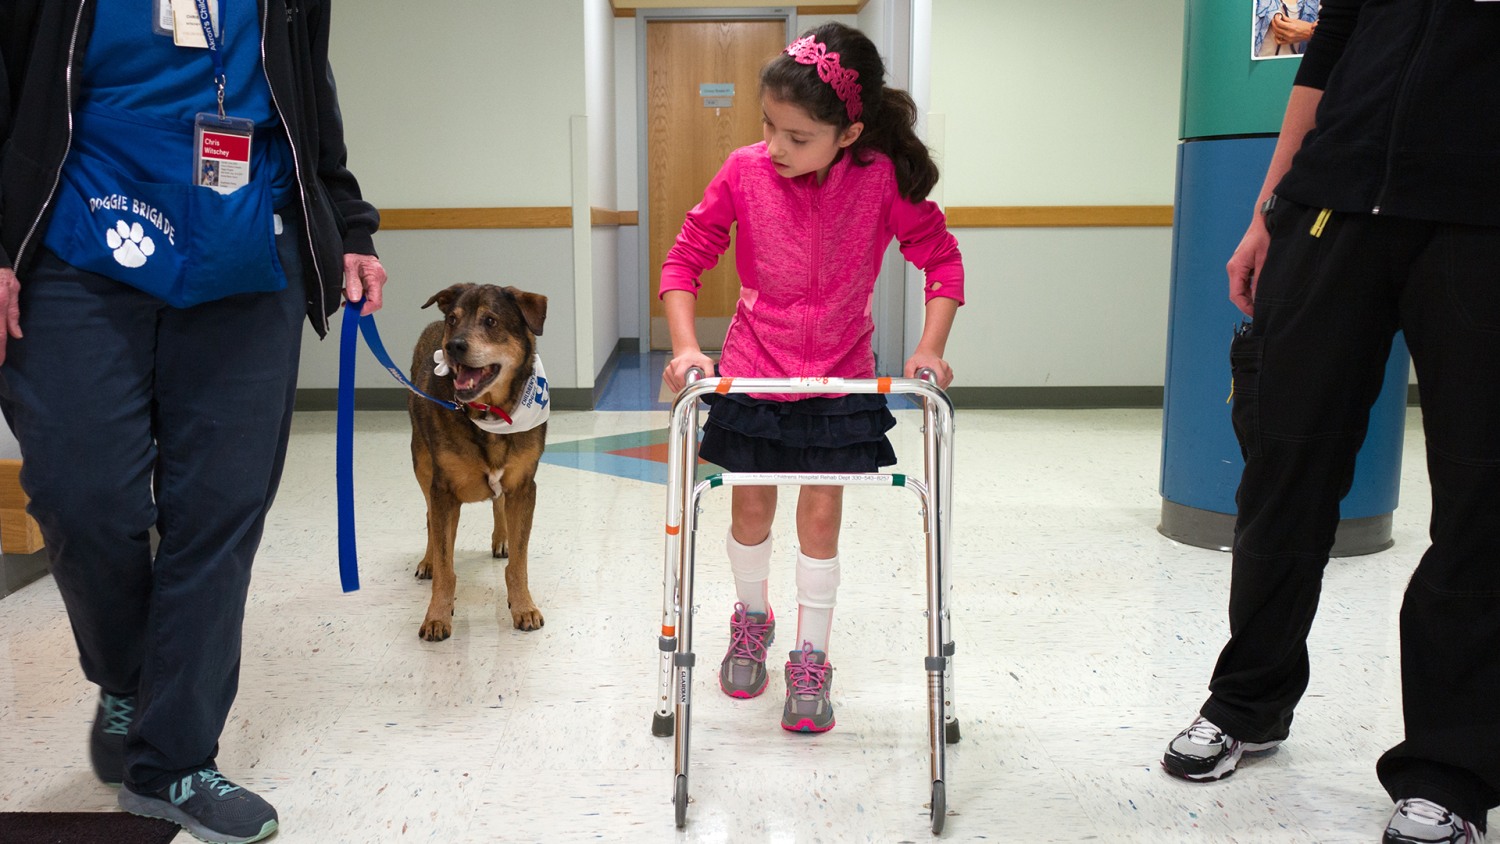 Dogs with special needs help kids heal in physical therapy